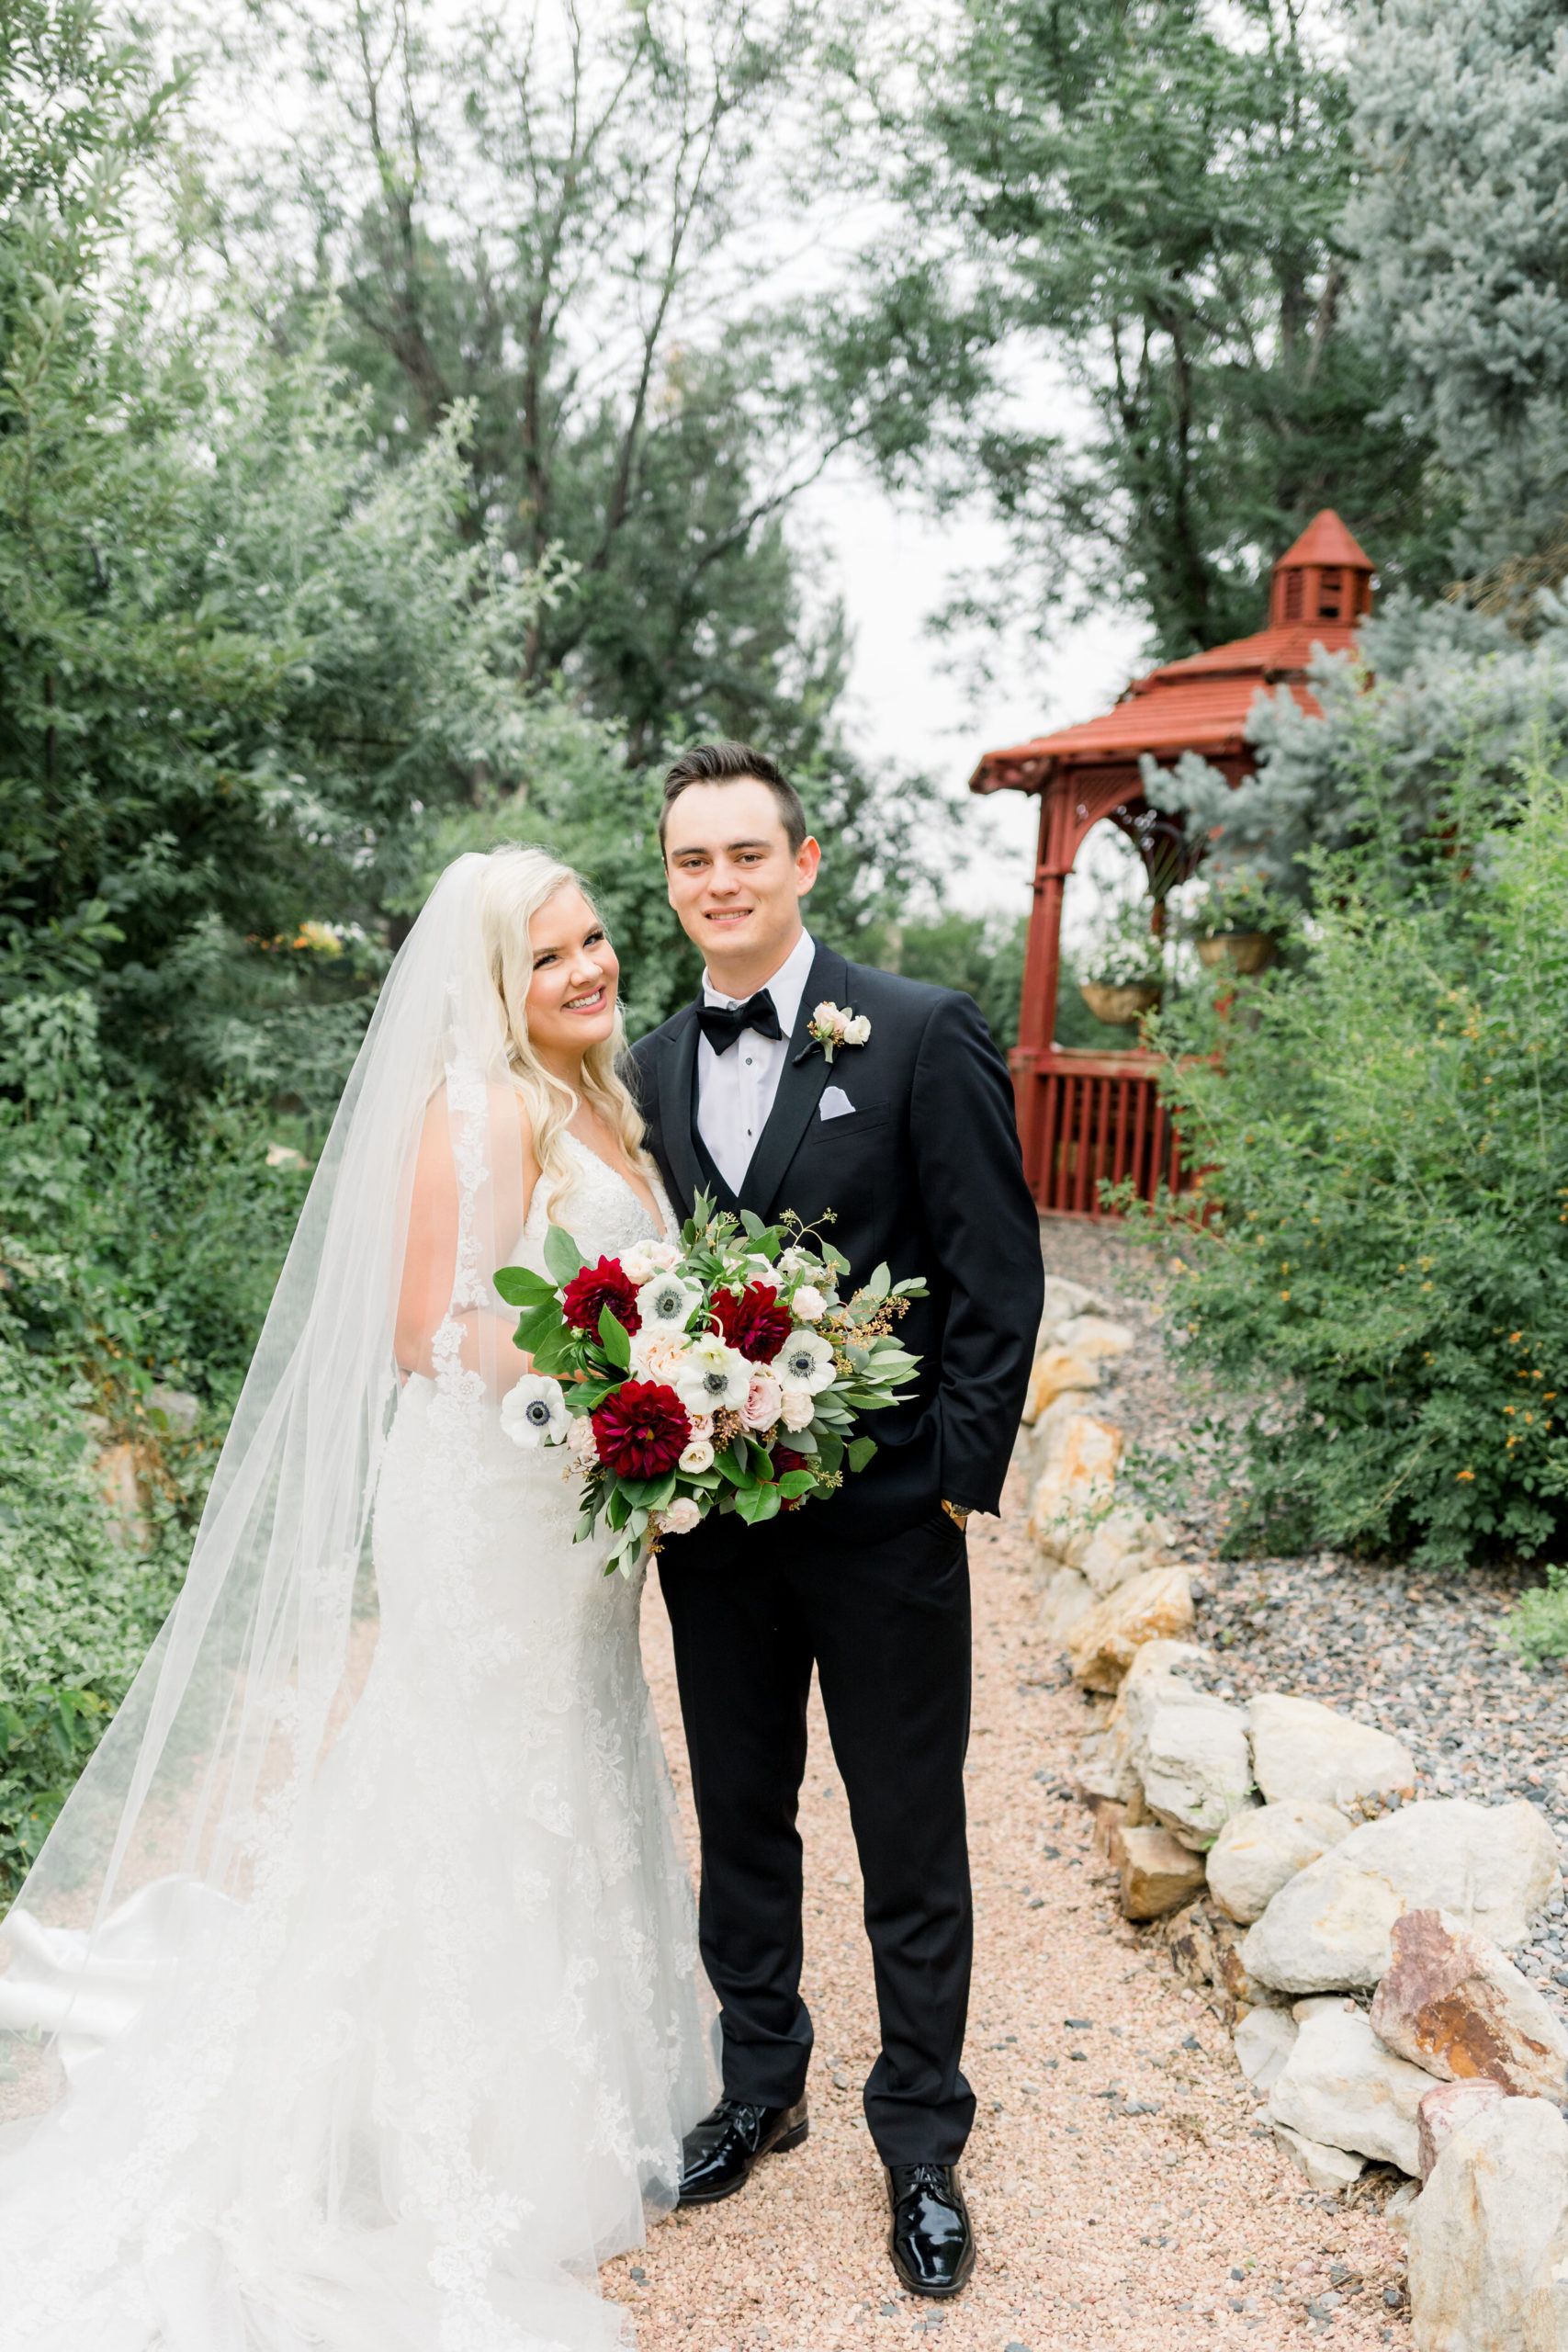 Kylie + Michael Algeo Wedding at Church Ranch in Westminister, Colorado